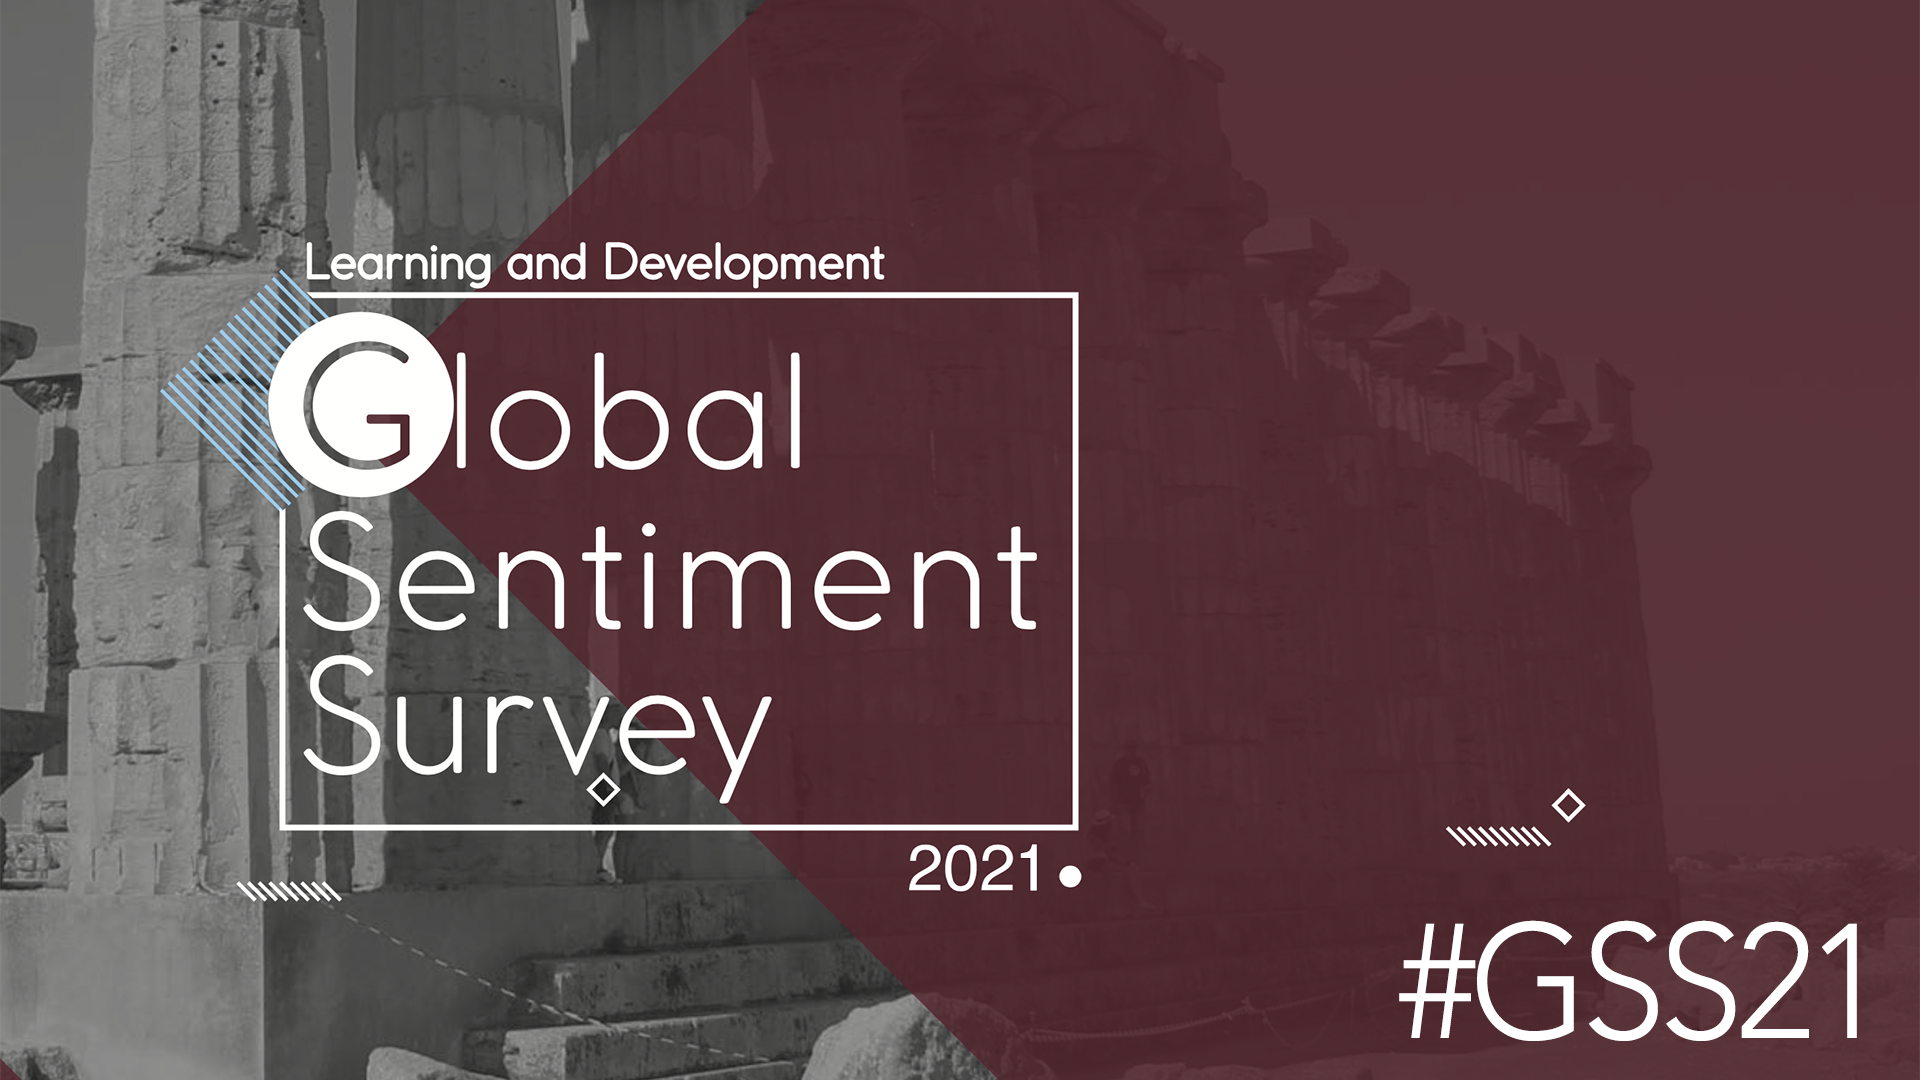 The Learning and Development Global Sentiment Survey 2021 #GSS21